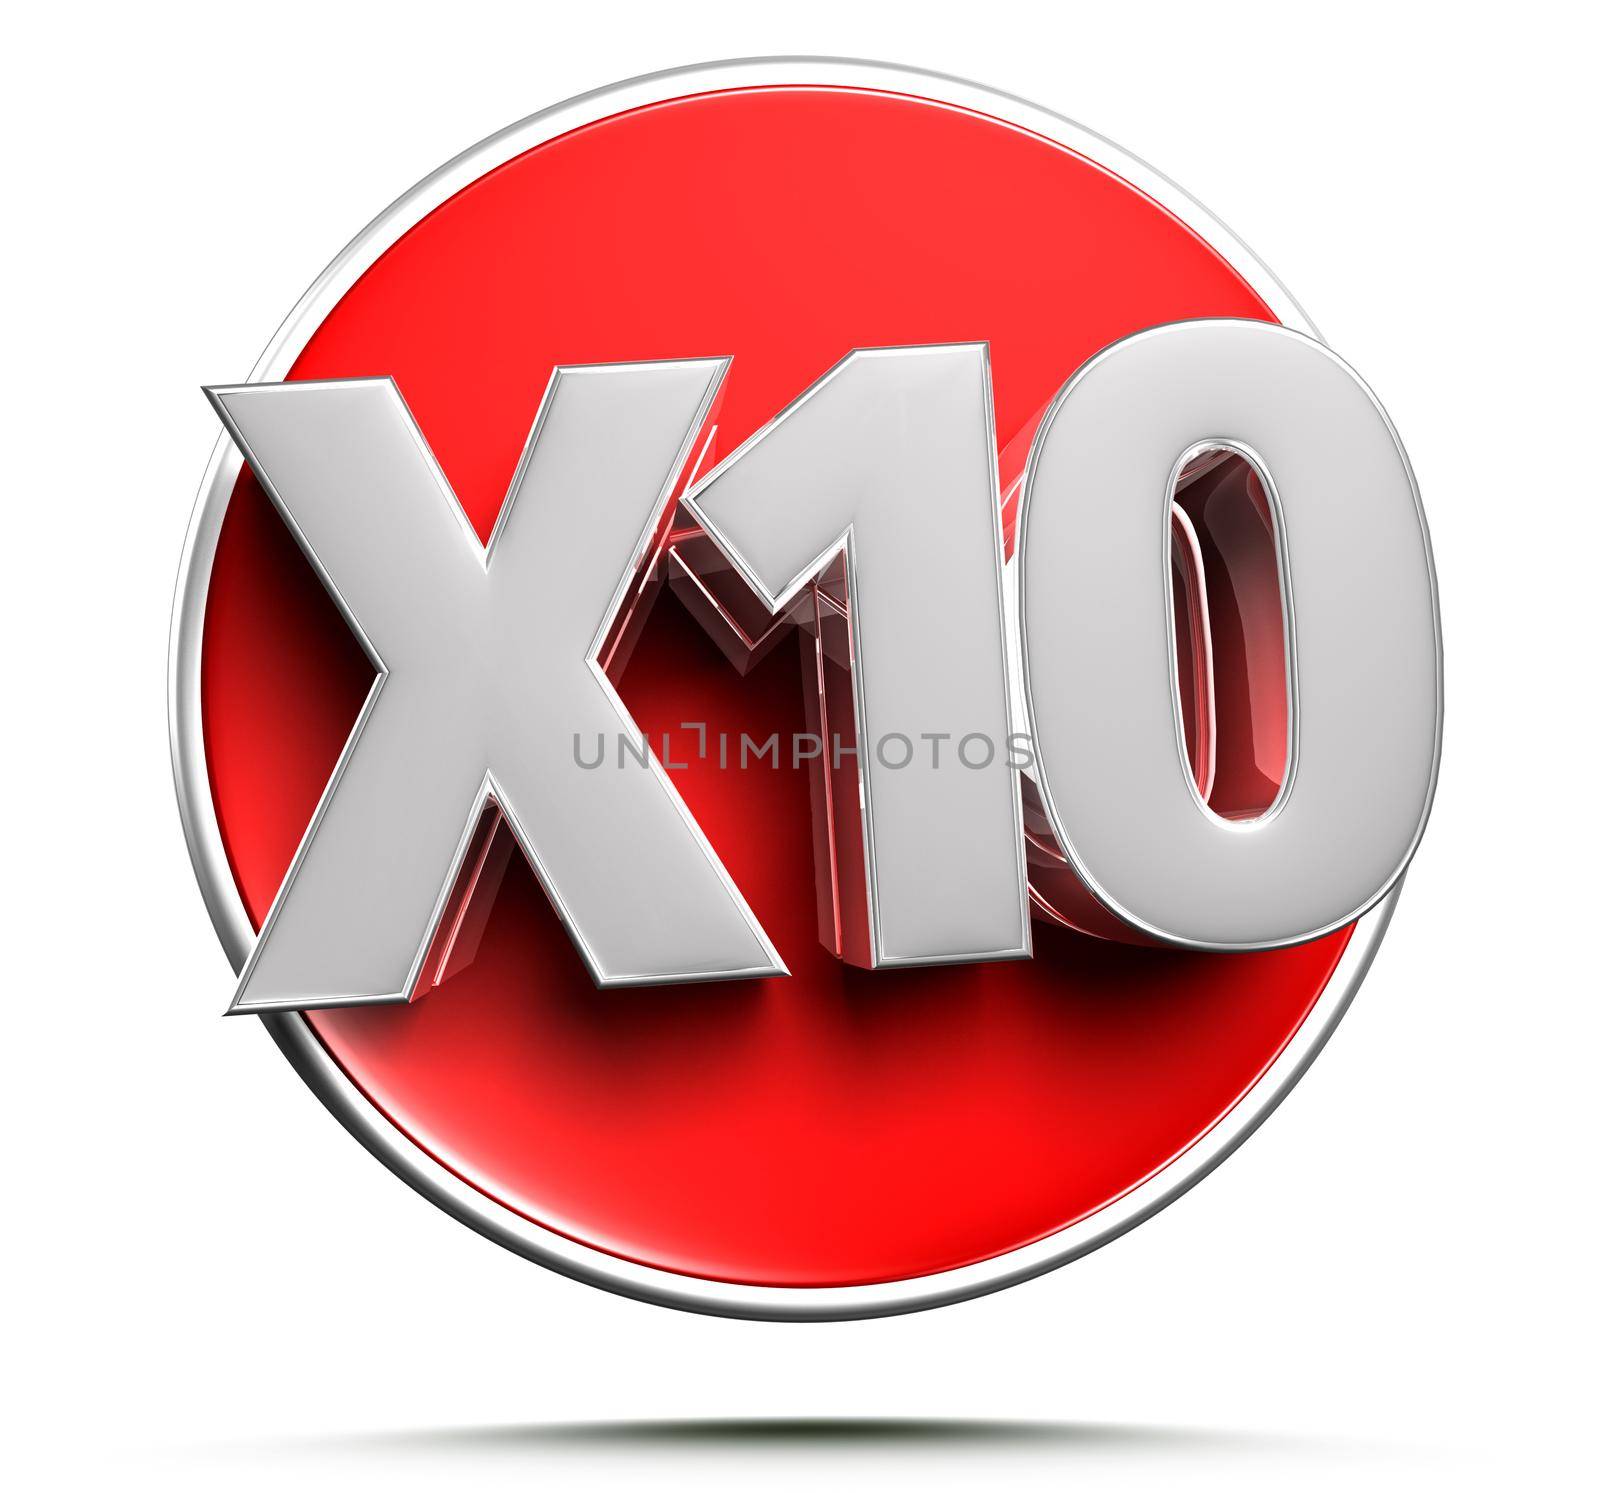 x10 red circle 3D illustration on white background with clipping path.